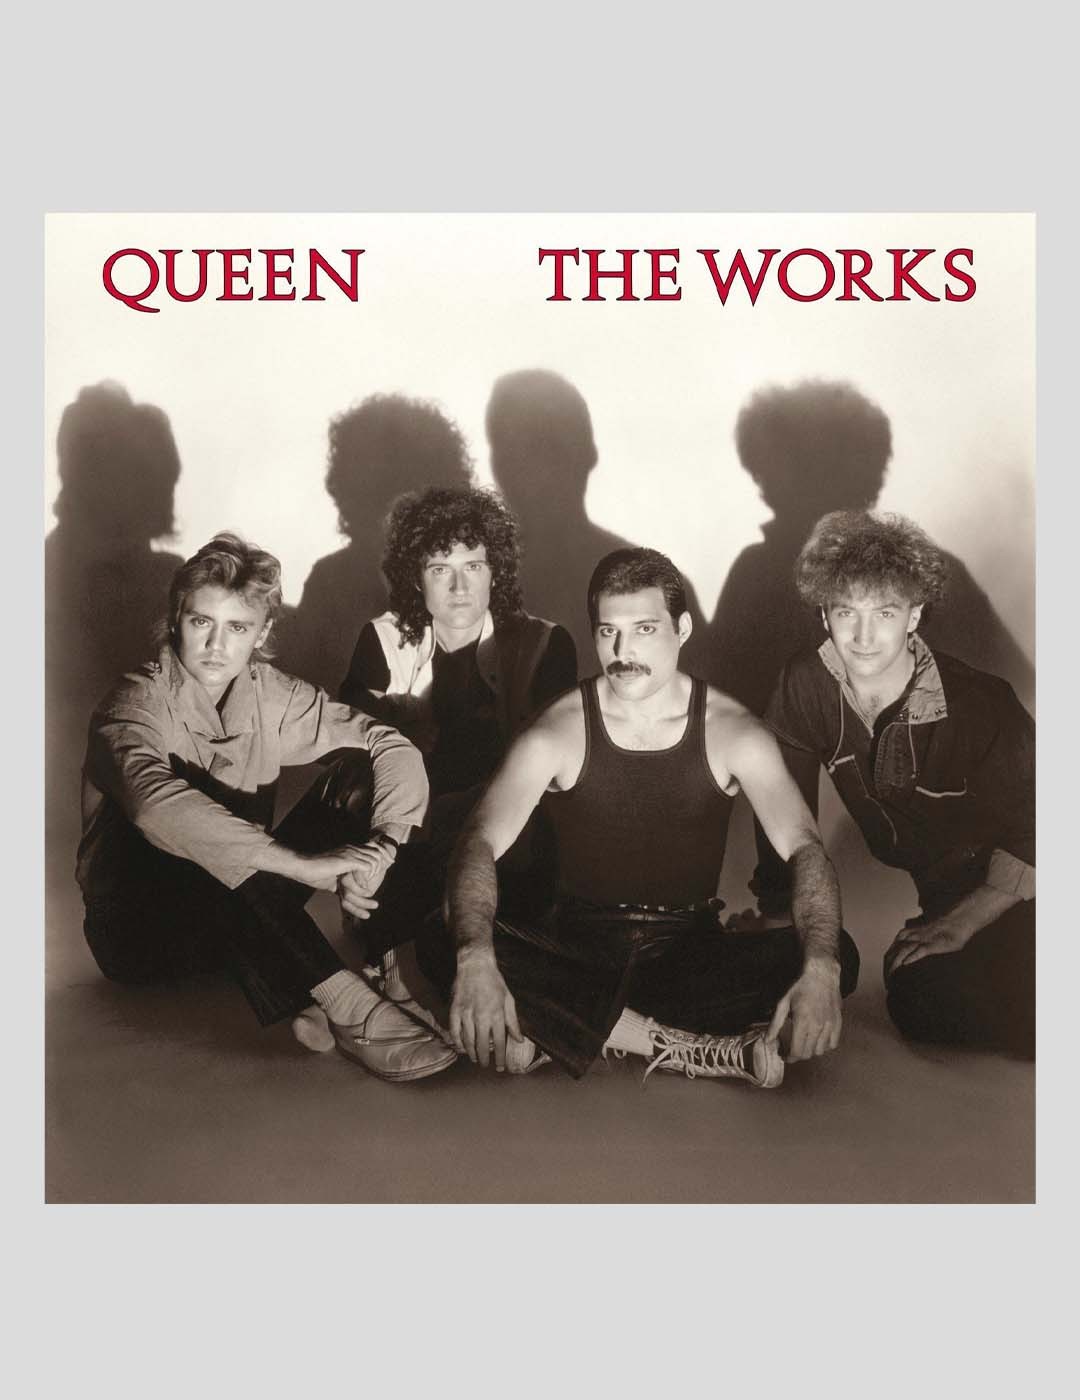 DISCO VINILO QUEEN - THE WORKS REMASTERED  